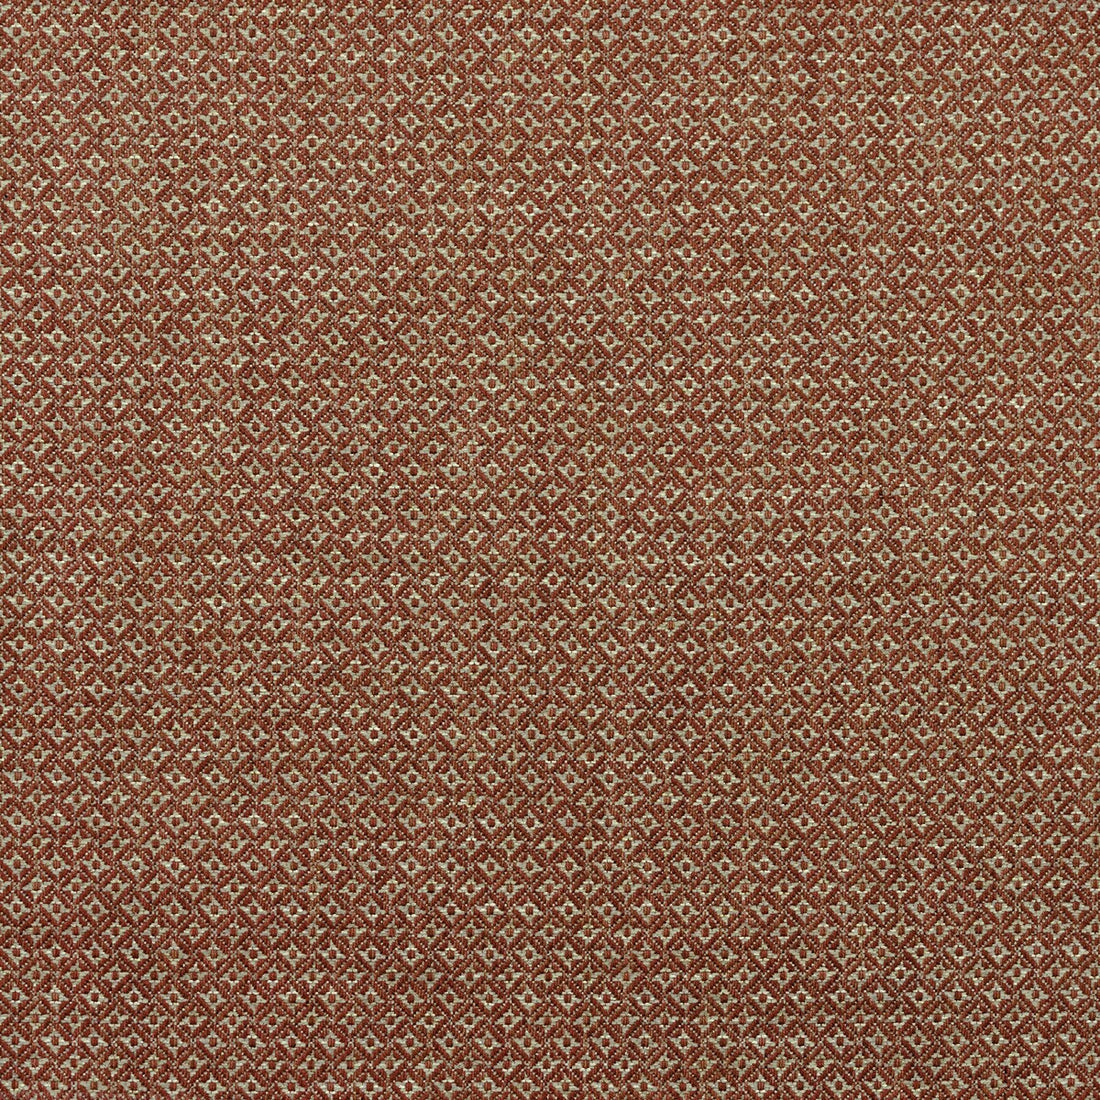 Cavendish fabric in tomato color - pattern BFC-3677.129.0 - by Lee Jofa in the Blithfield collection